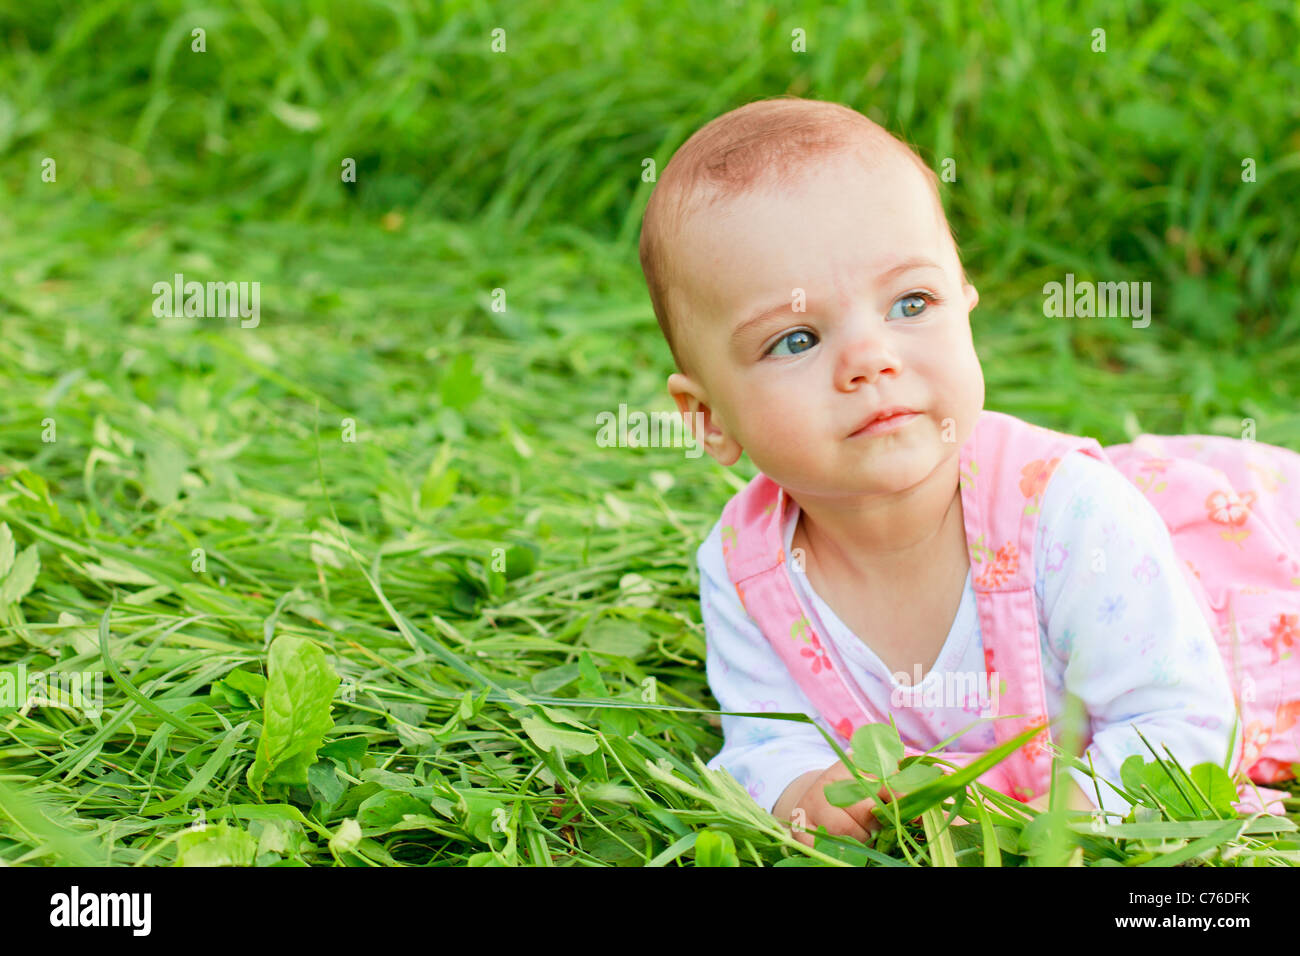 Sweet baby girl lying on grass Banque D'Images